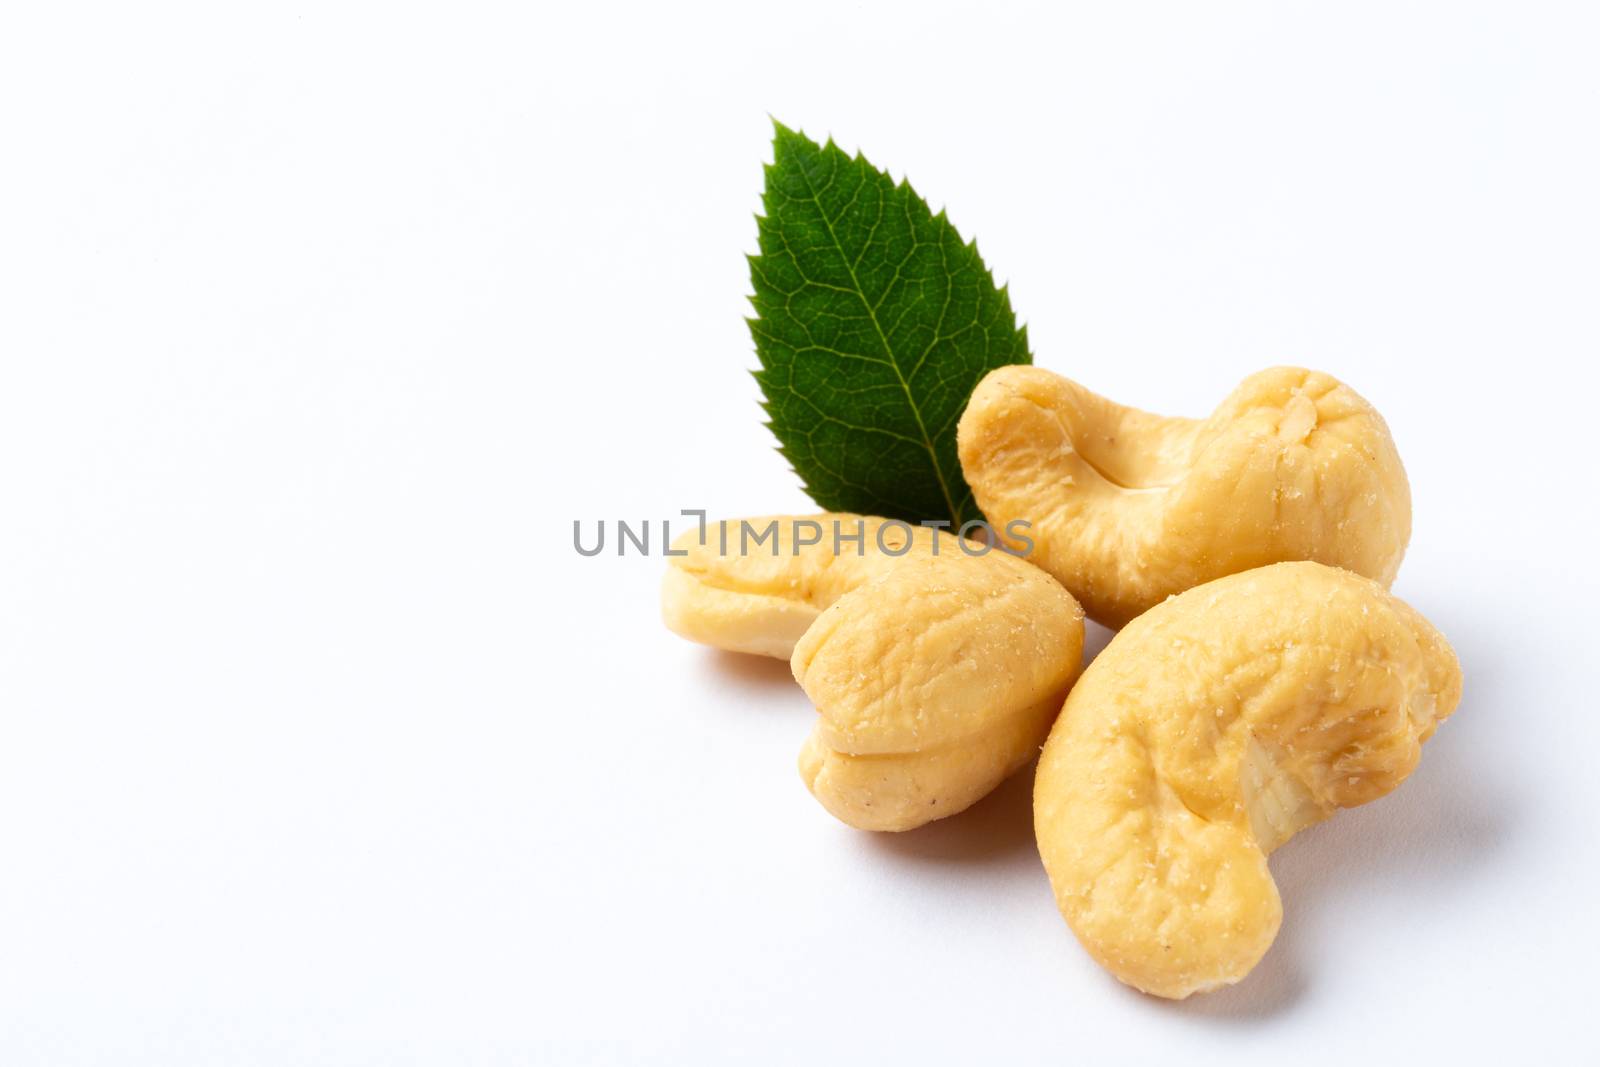 Cashew nuts with a green leaf on white background by 25ehaag6